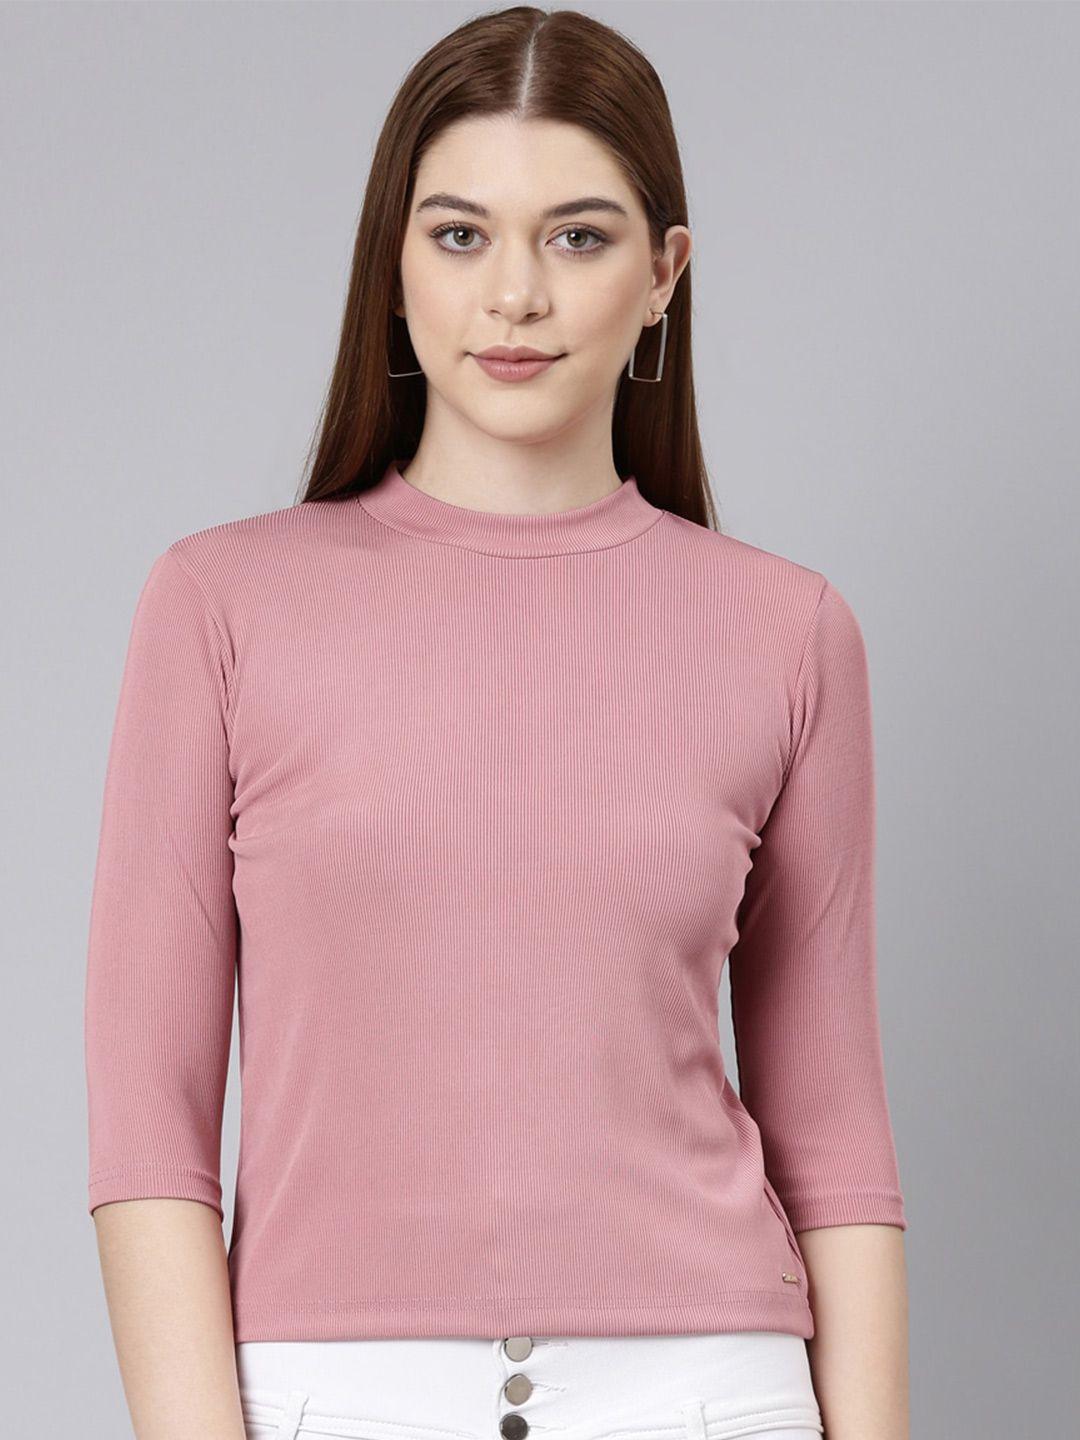 twin-birds-high-neck-ribbed-casual-t-shirt